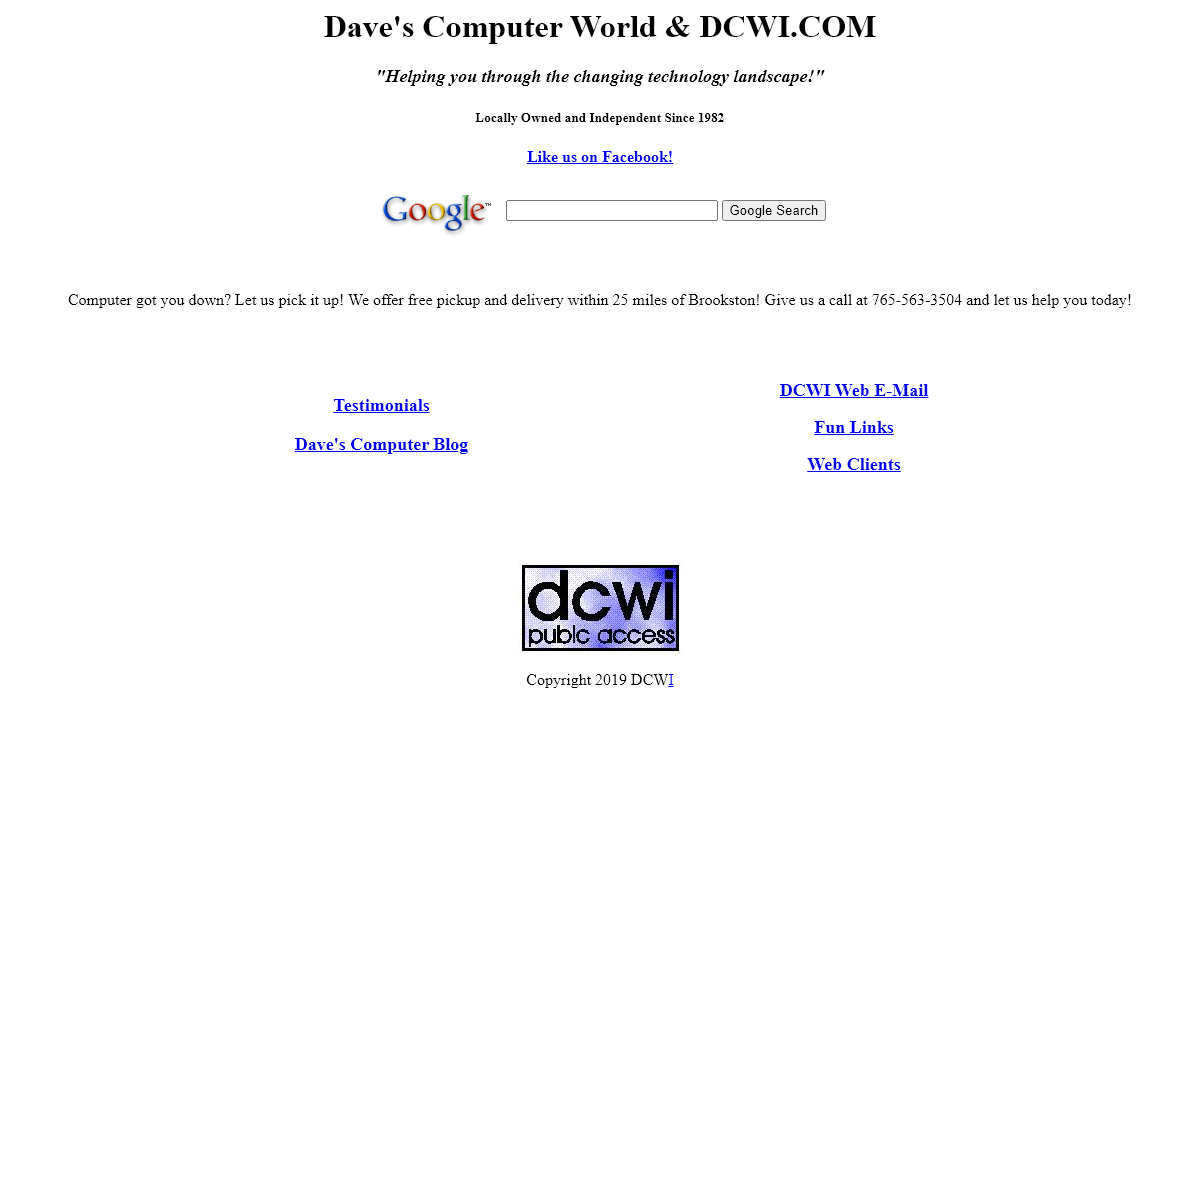 A complete backup of dcwi.com